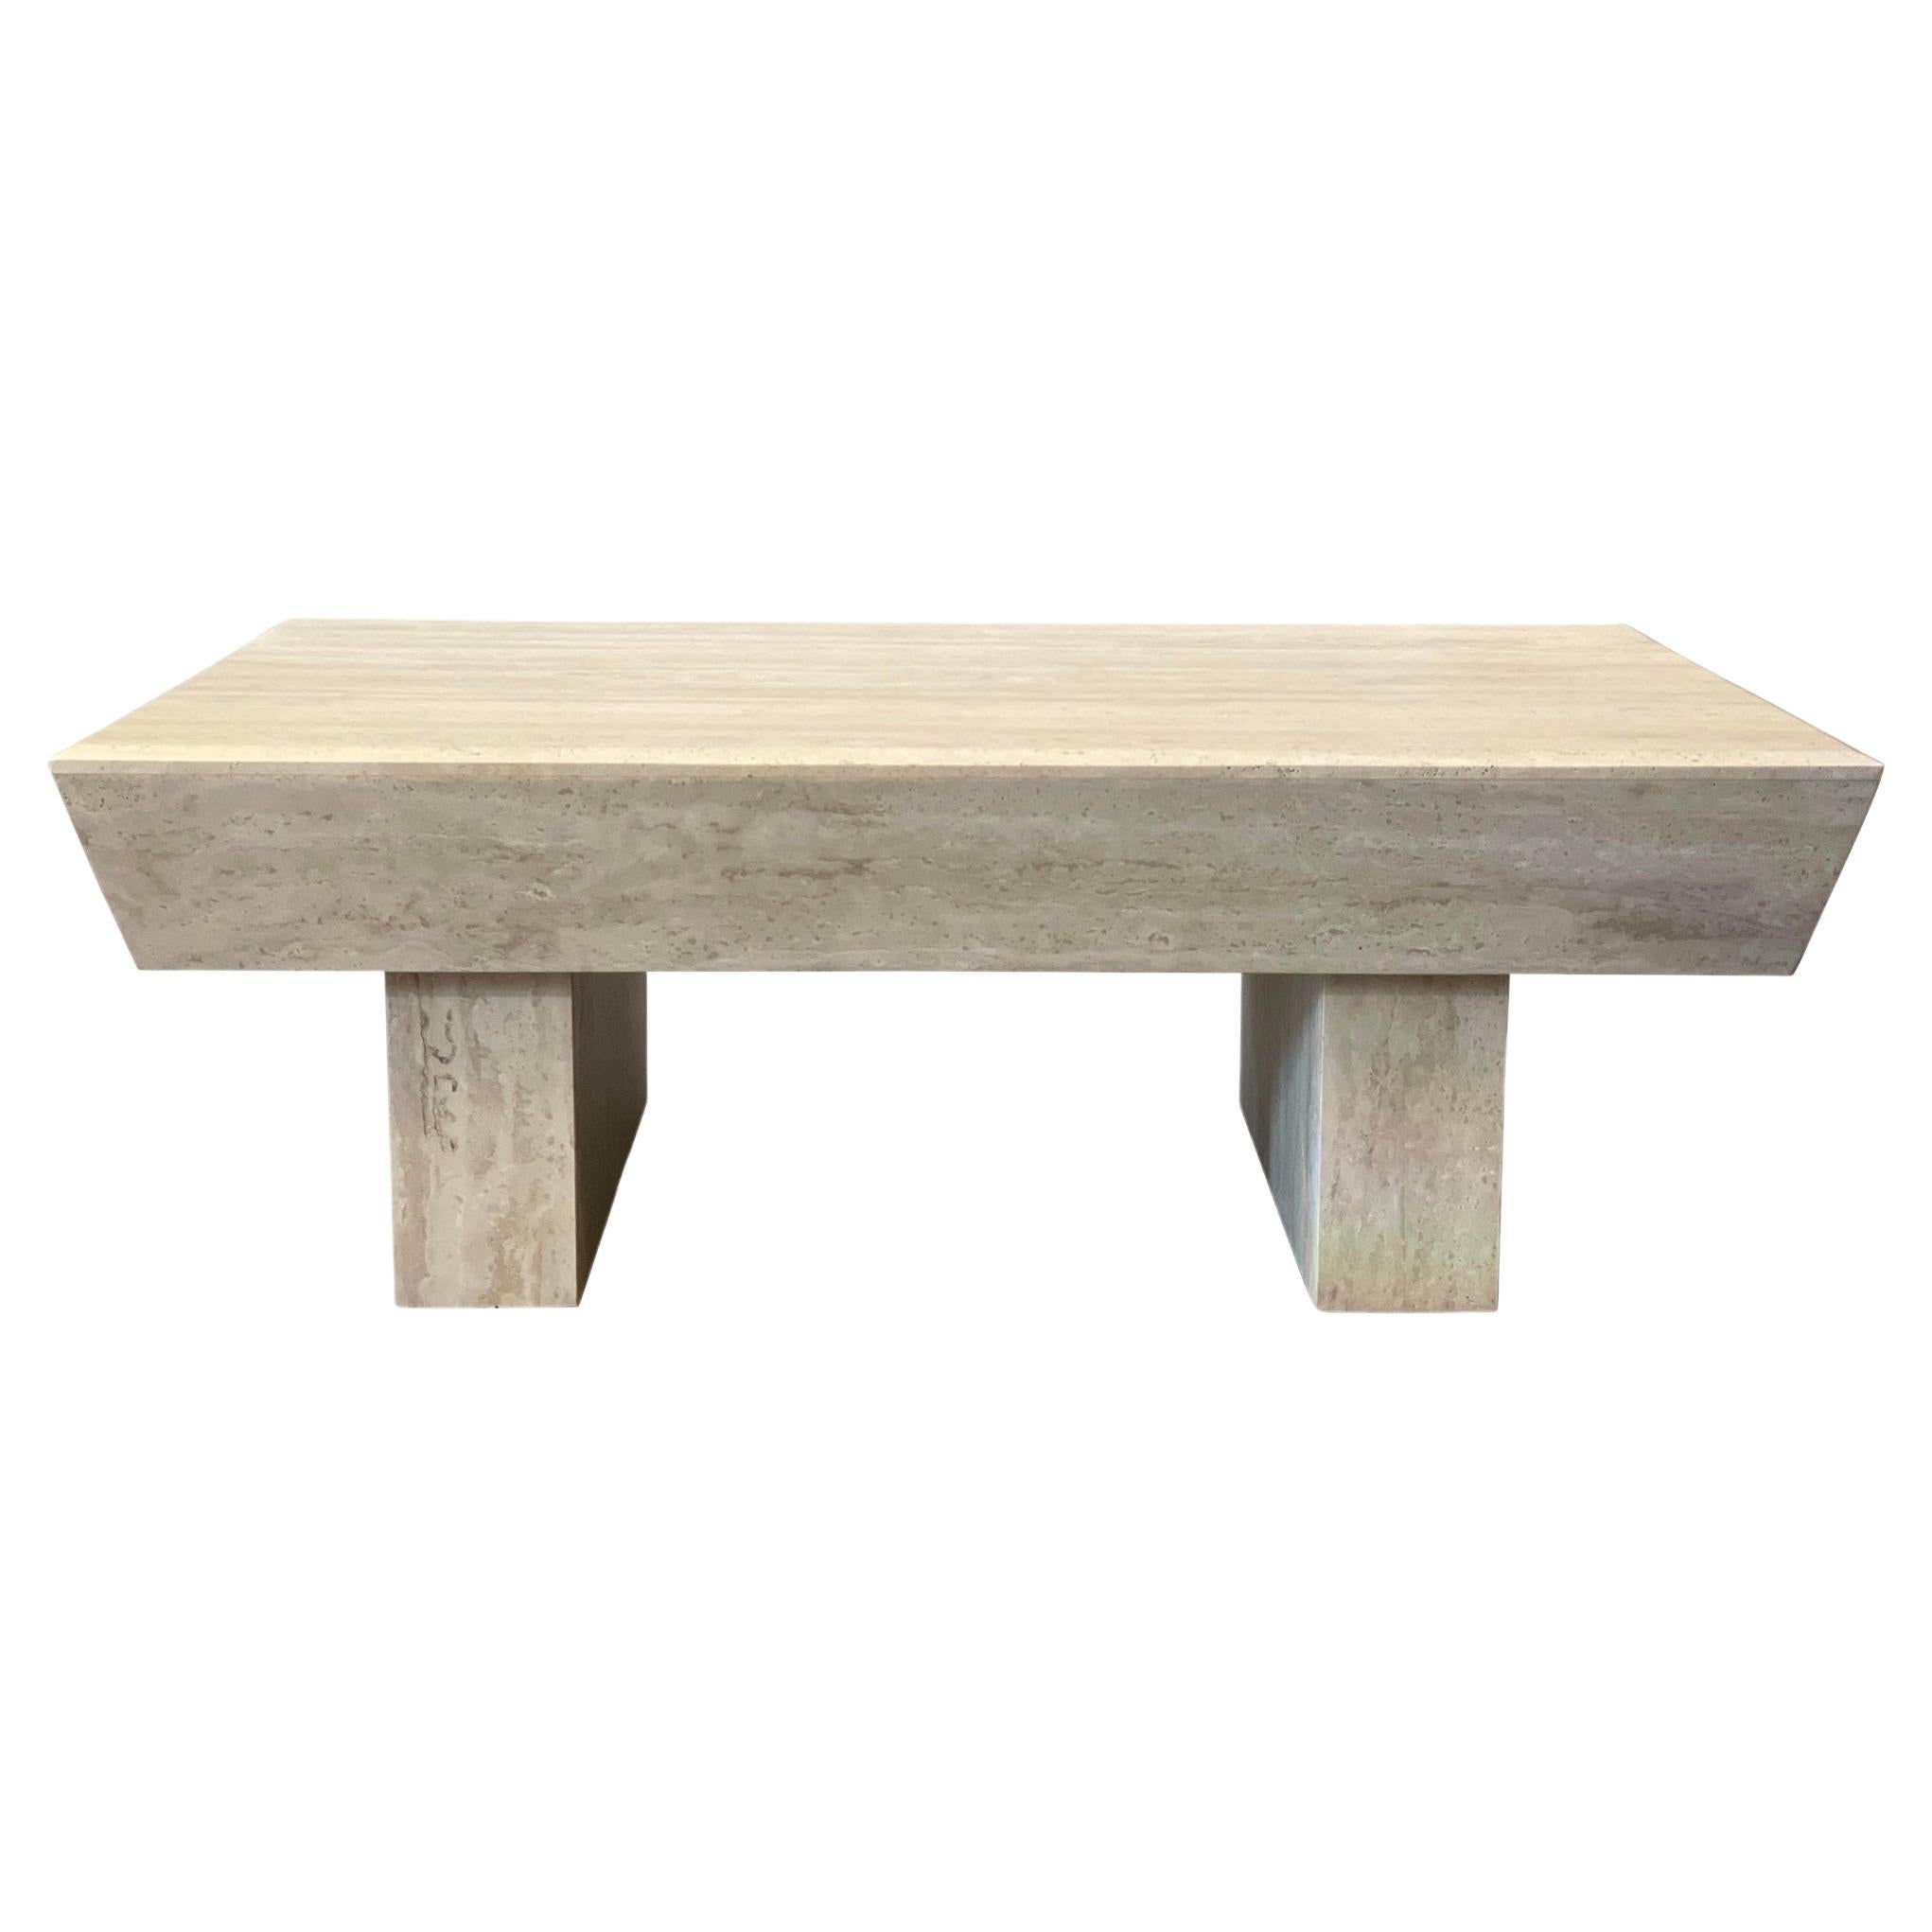 1980s Travertine Postmodern Vintage Coffee Table with Angled Edge For Sale